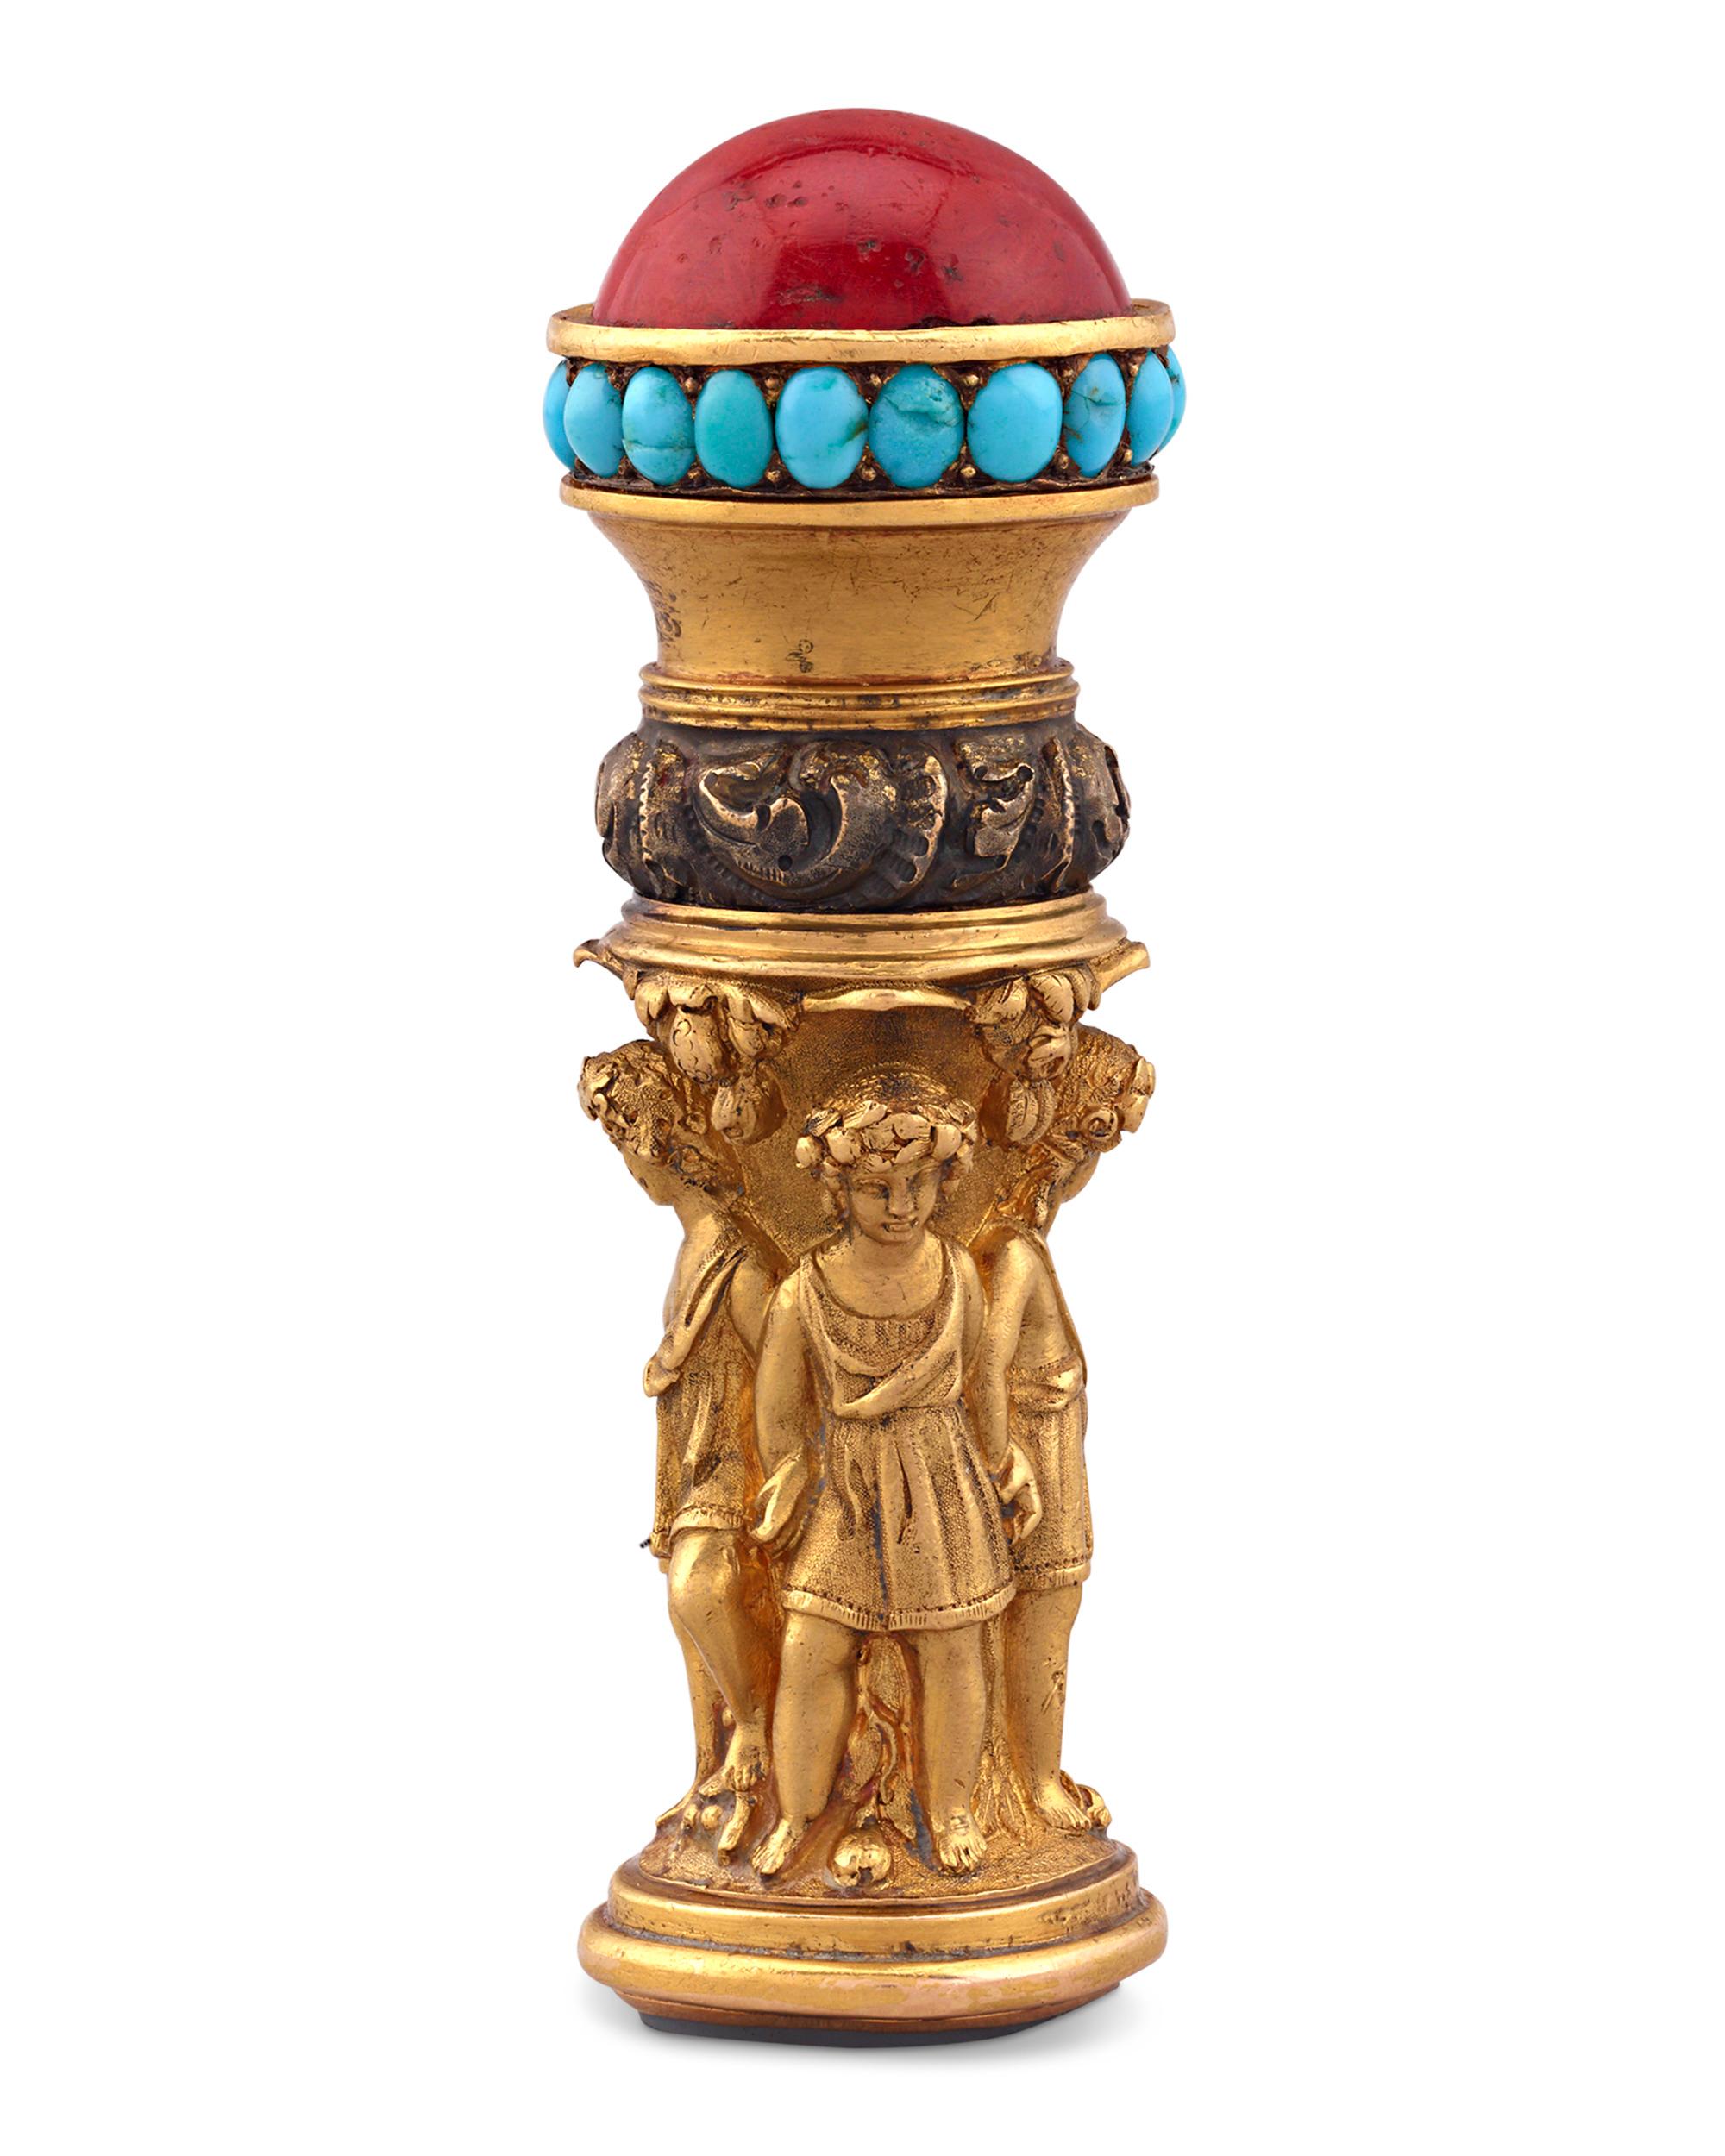 A neoclassical motif featuring five youths clad in togas are chased and repoussé into this opulent Georgian-period gold fob seal. The dome-shaped handle is inlaid with brilliant red coral and sky-blue turquoise cabochons, lending vibrancy to this